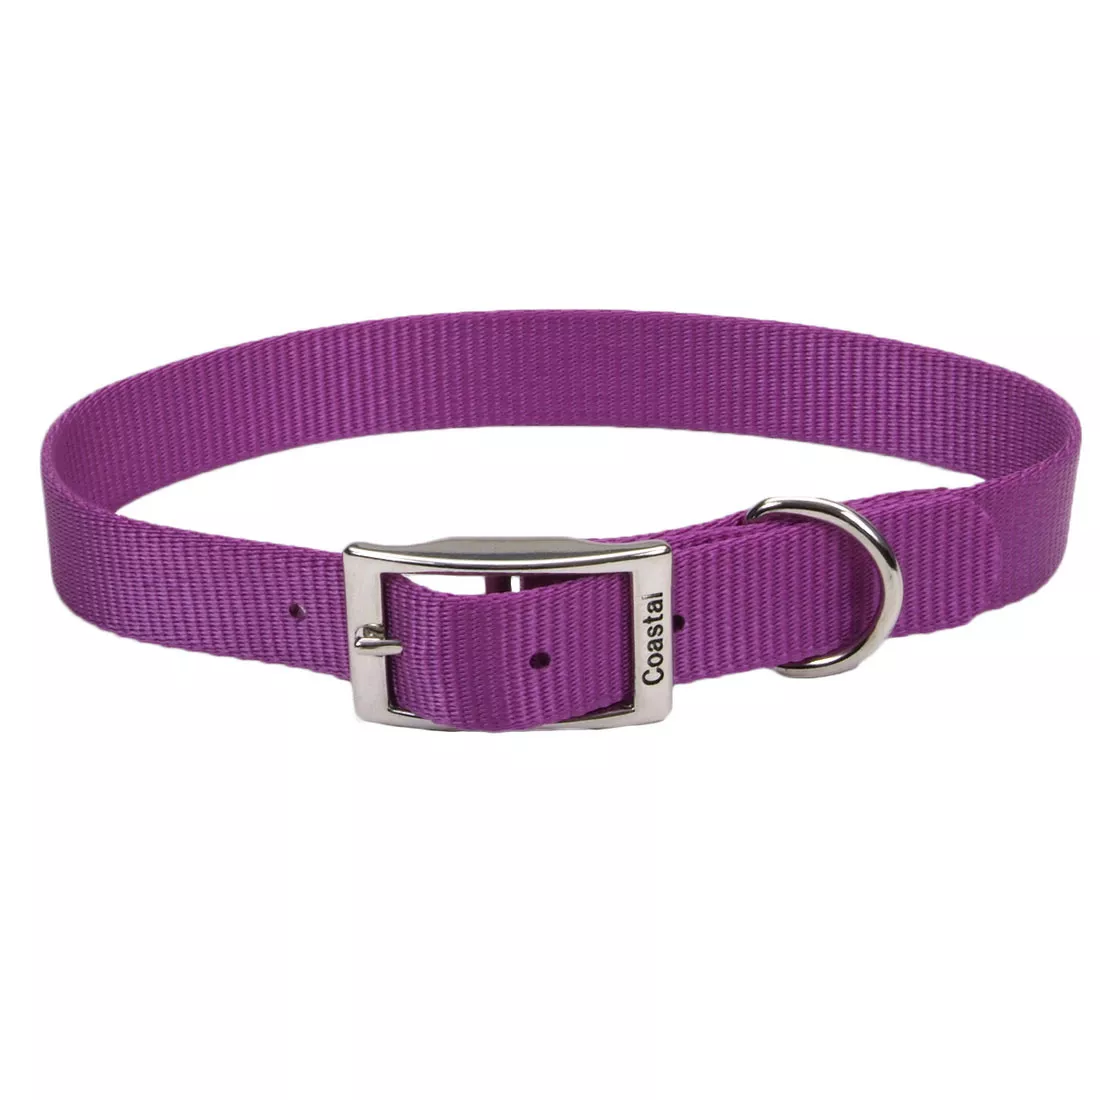 Coastal 1.5 Sublime Dog Collar Flower Purple and Yellow Large Buy, Best  Price. Global Shipping.